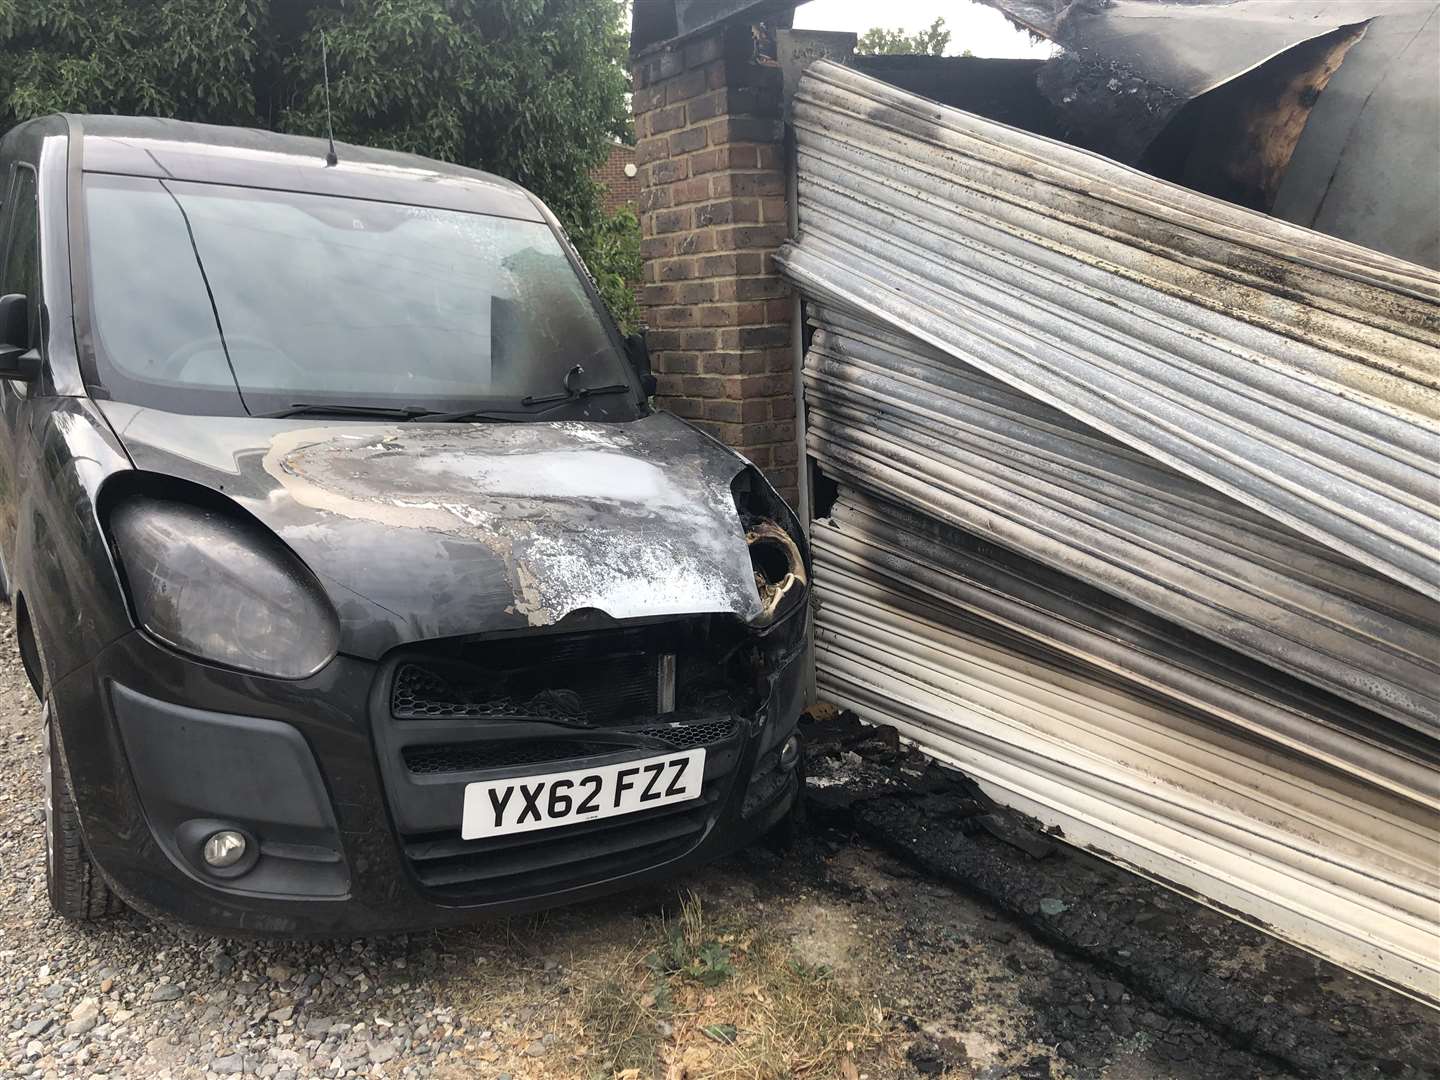 A car parked outside has also been burnt